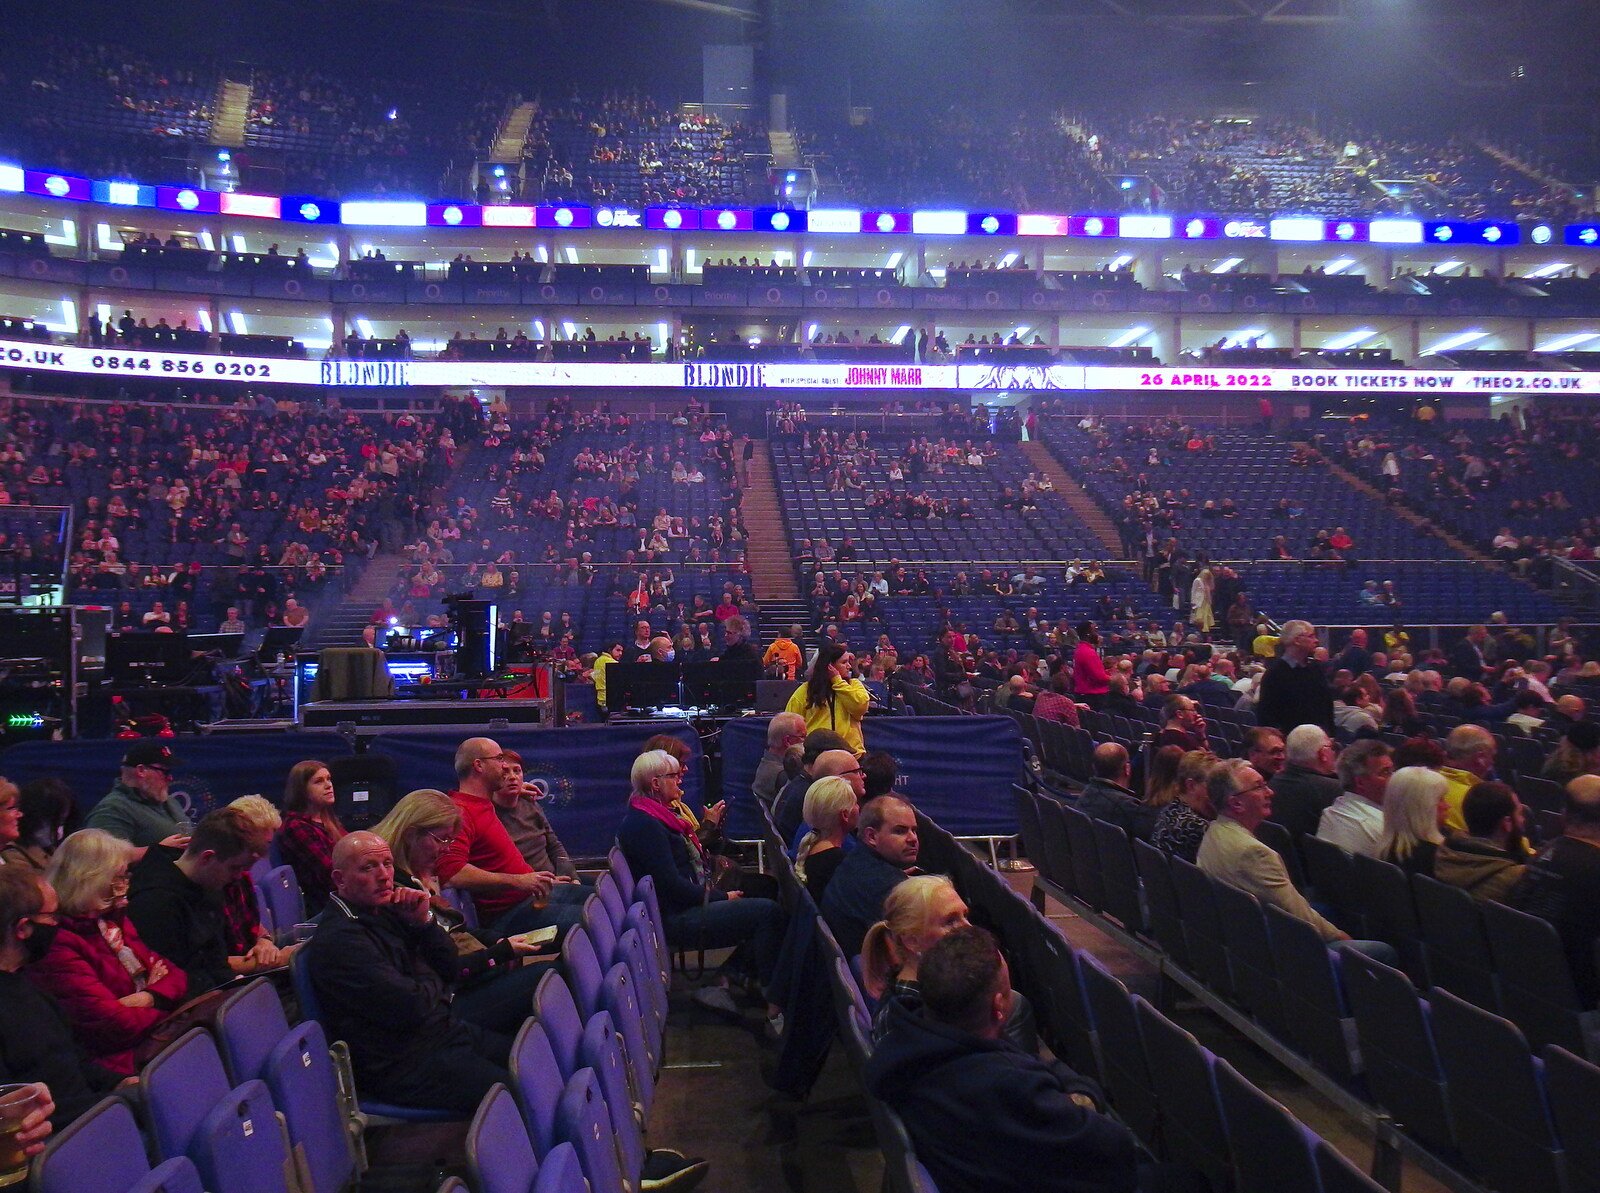 The O2 fills up from Genesis at the O2, North Greenwich, London - 24th March 2022